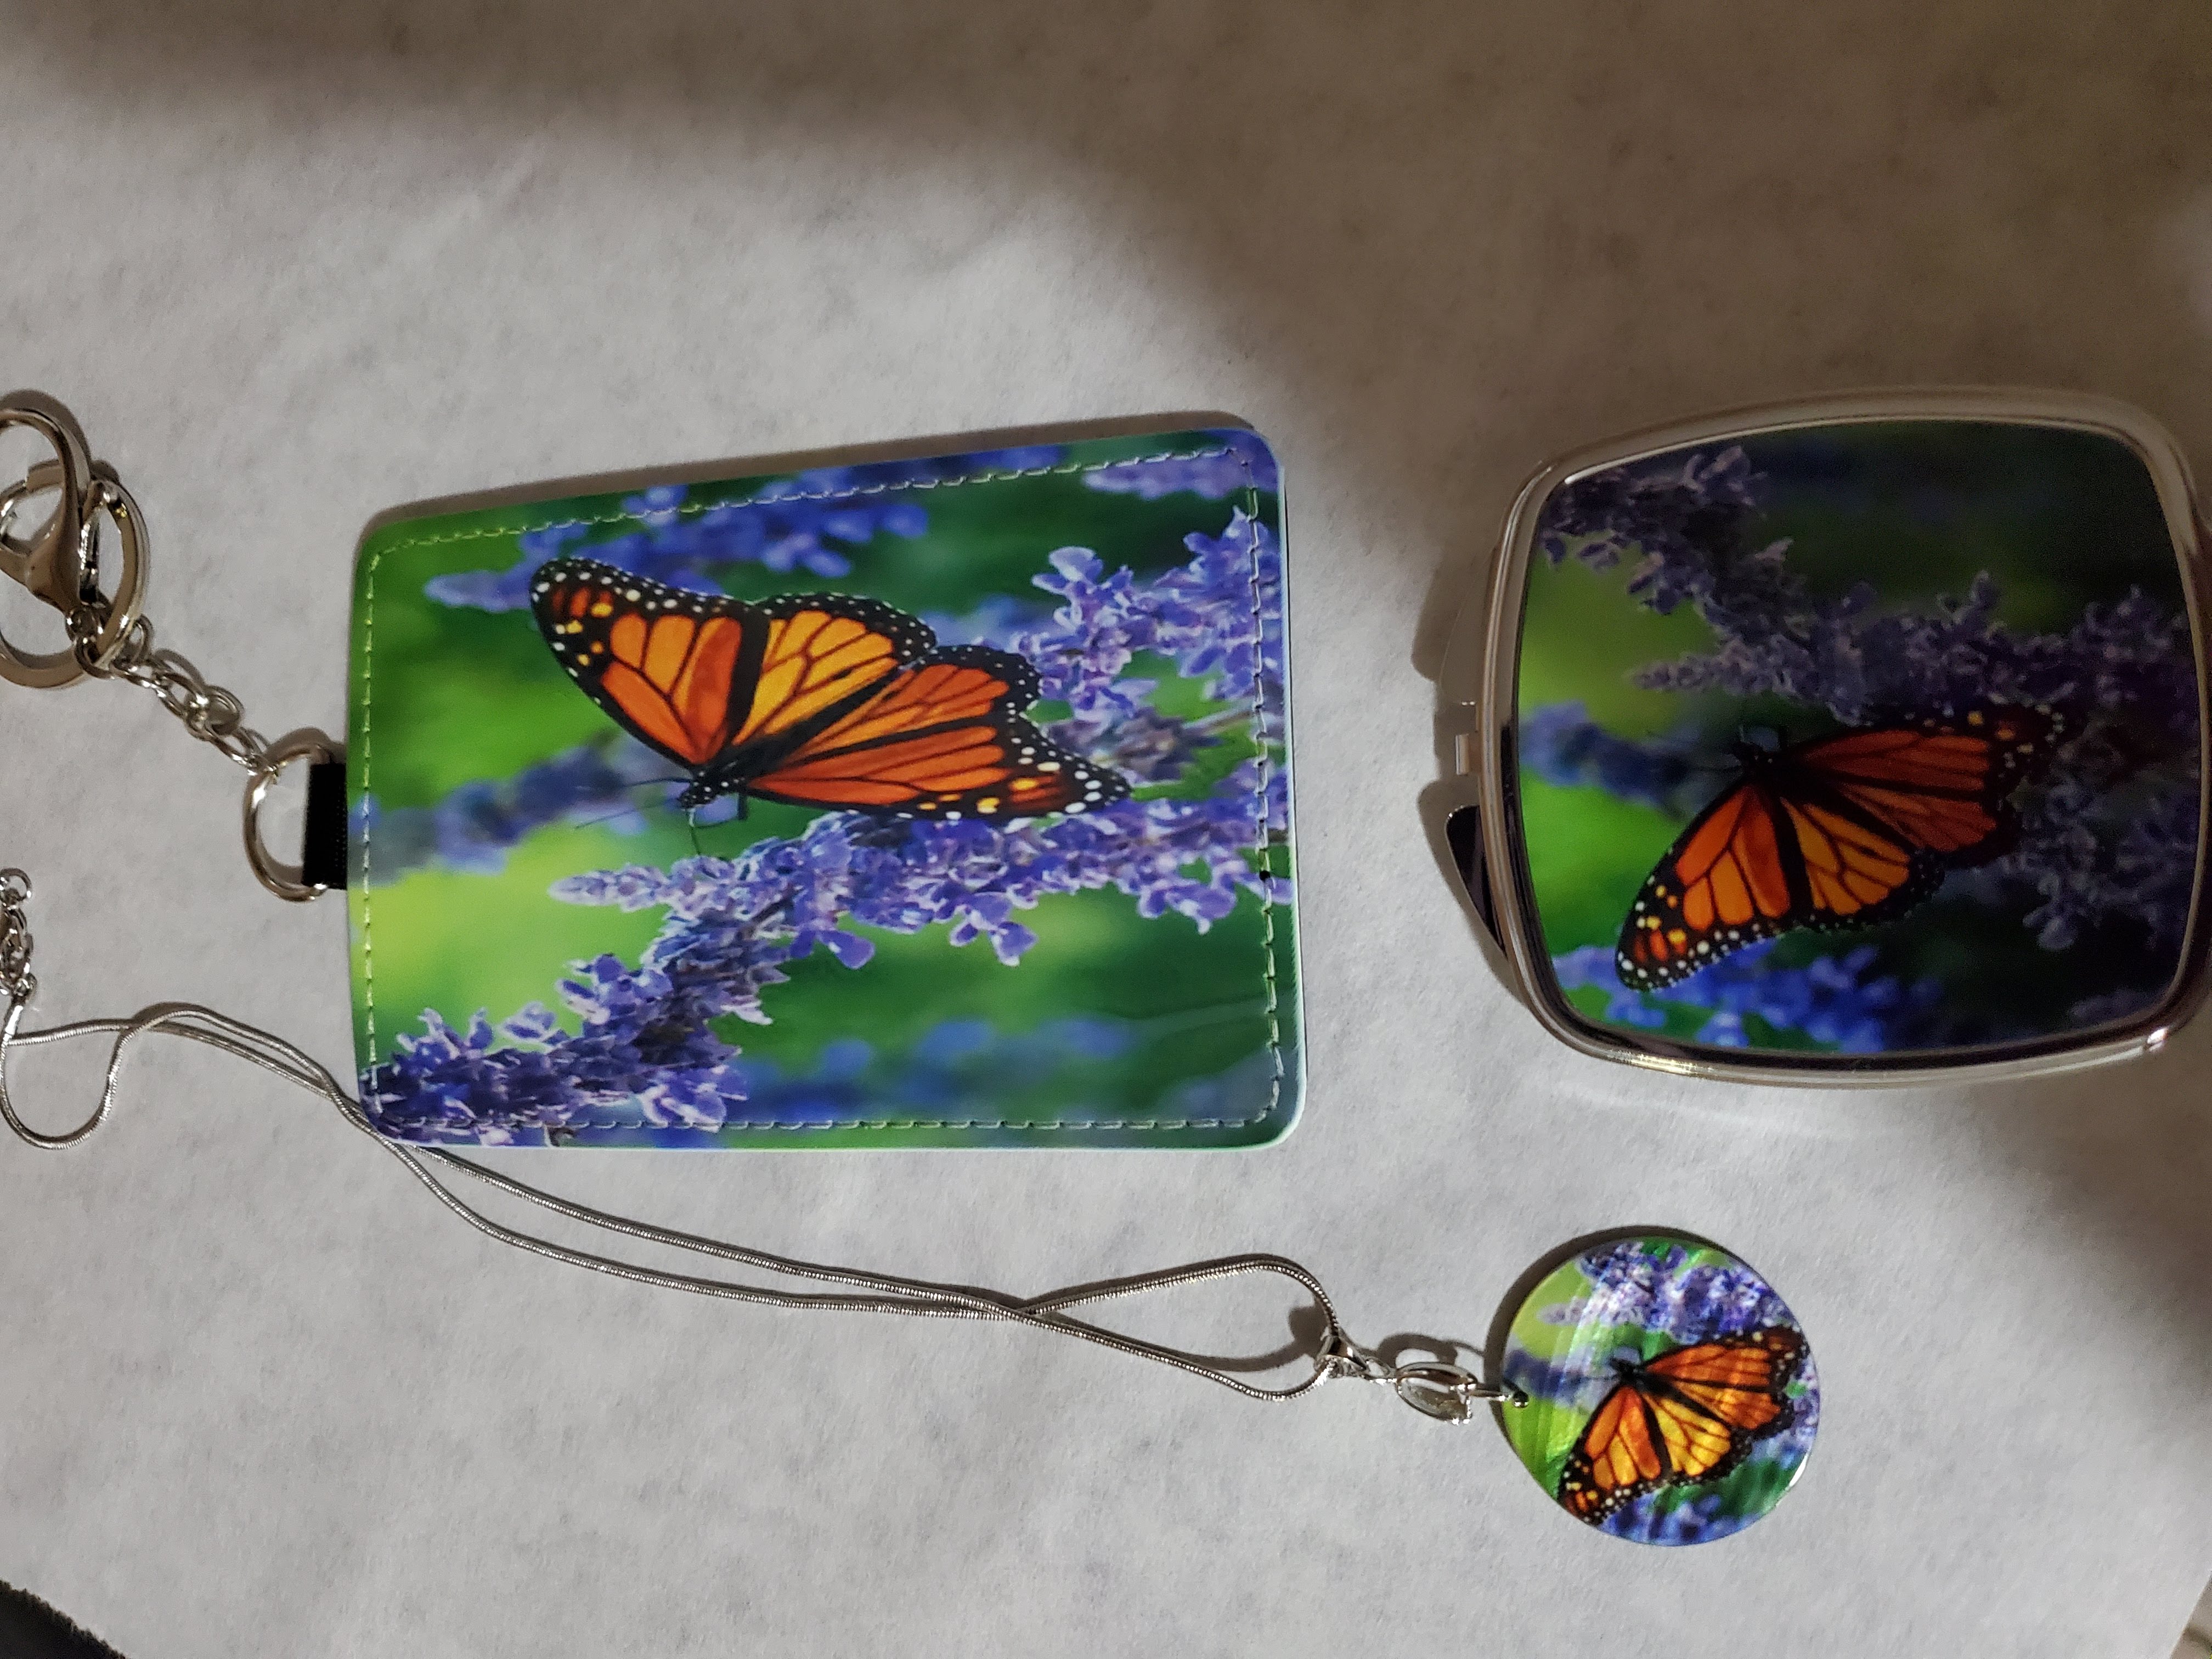 Butterfly trio made with sublimation printing